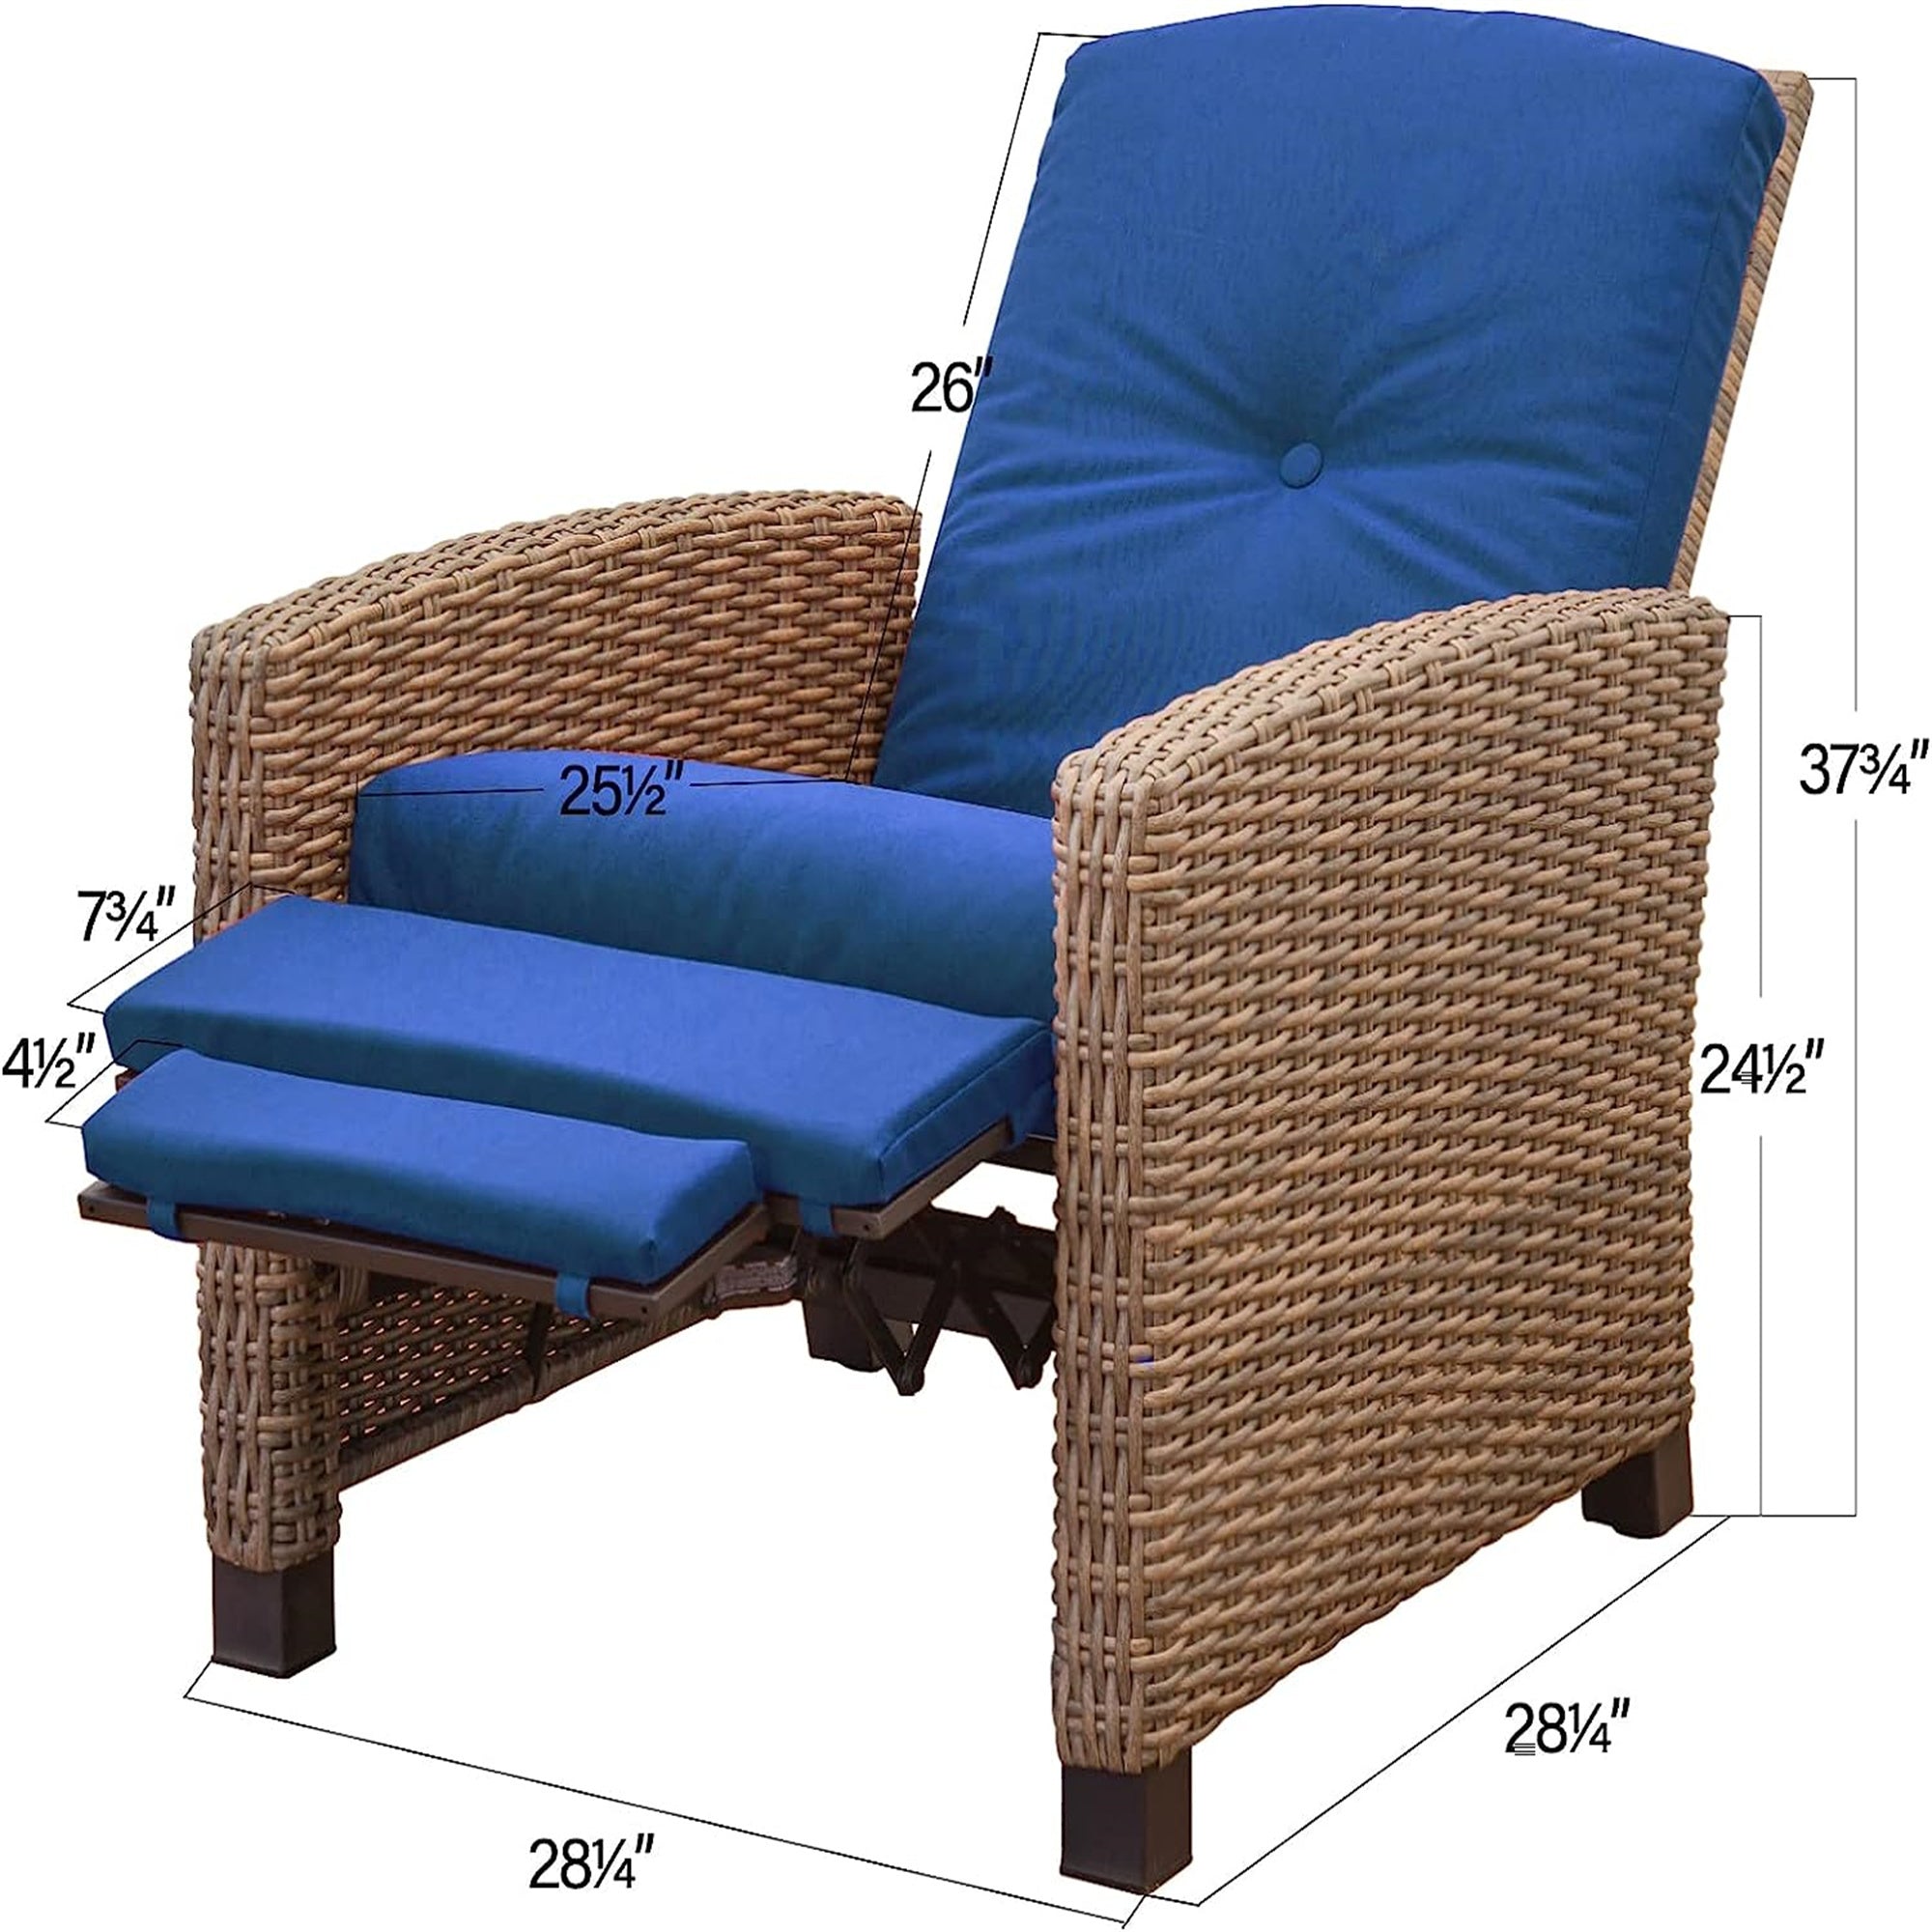 Indoor & Outdoor Recliner, All-Weather Wicker Reclining Patio Chair, Blue Cushion (Blue,1 Chair)